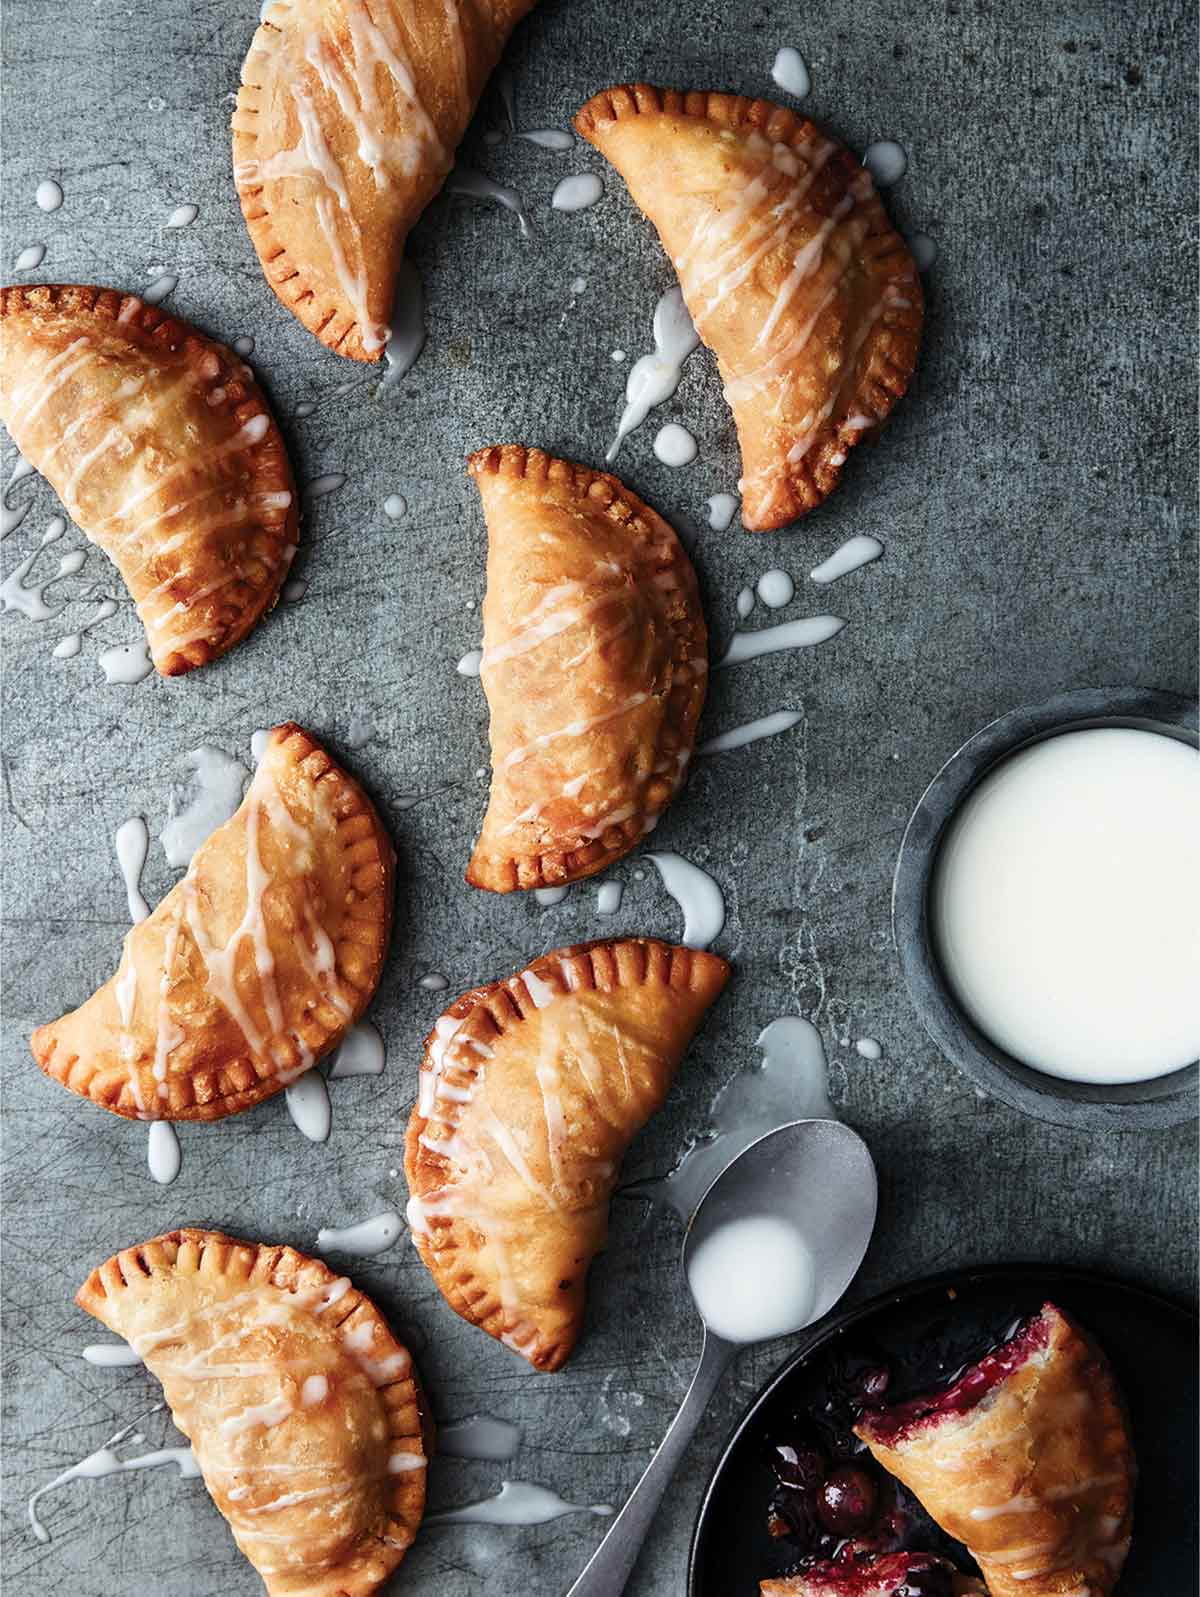 8 crescent-shape blueberry fried pies with Meyer lemon drizzle sauce nearby all on a piece of slate